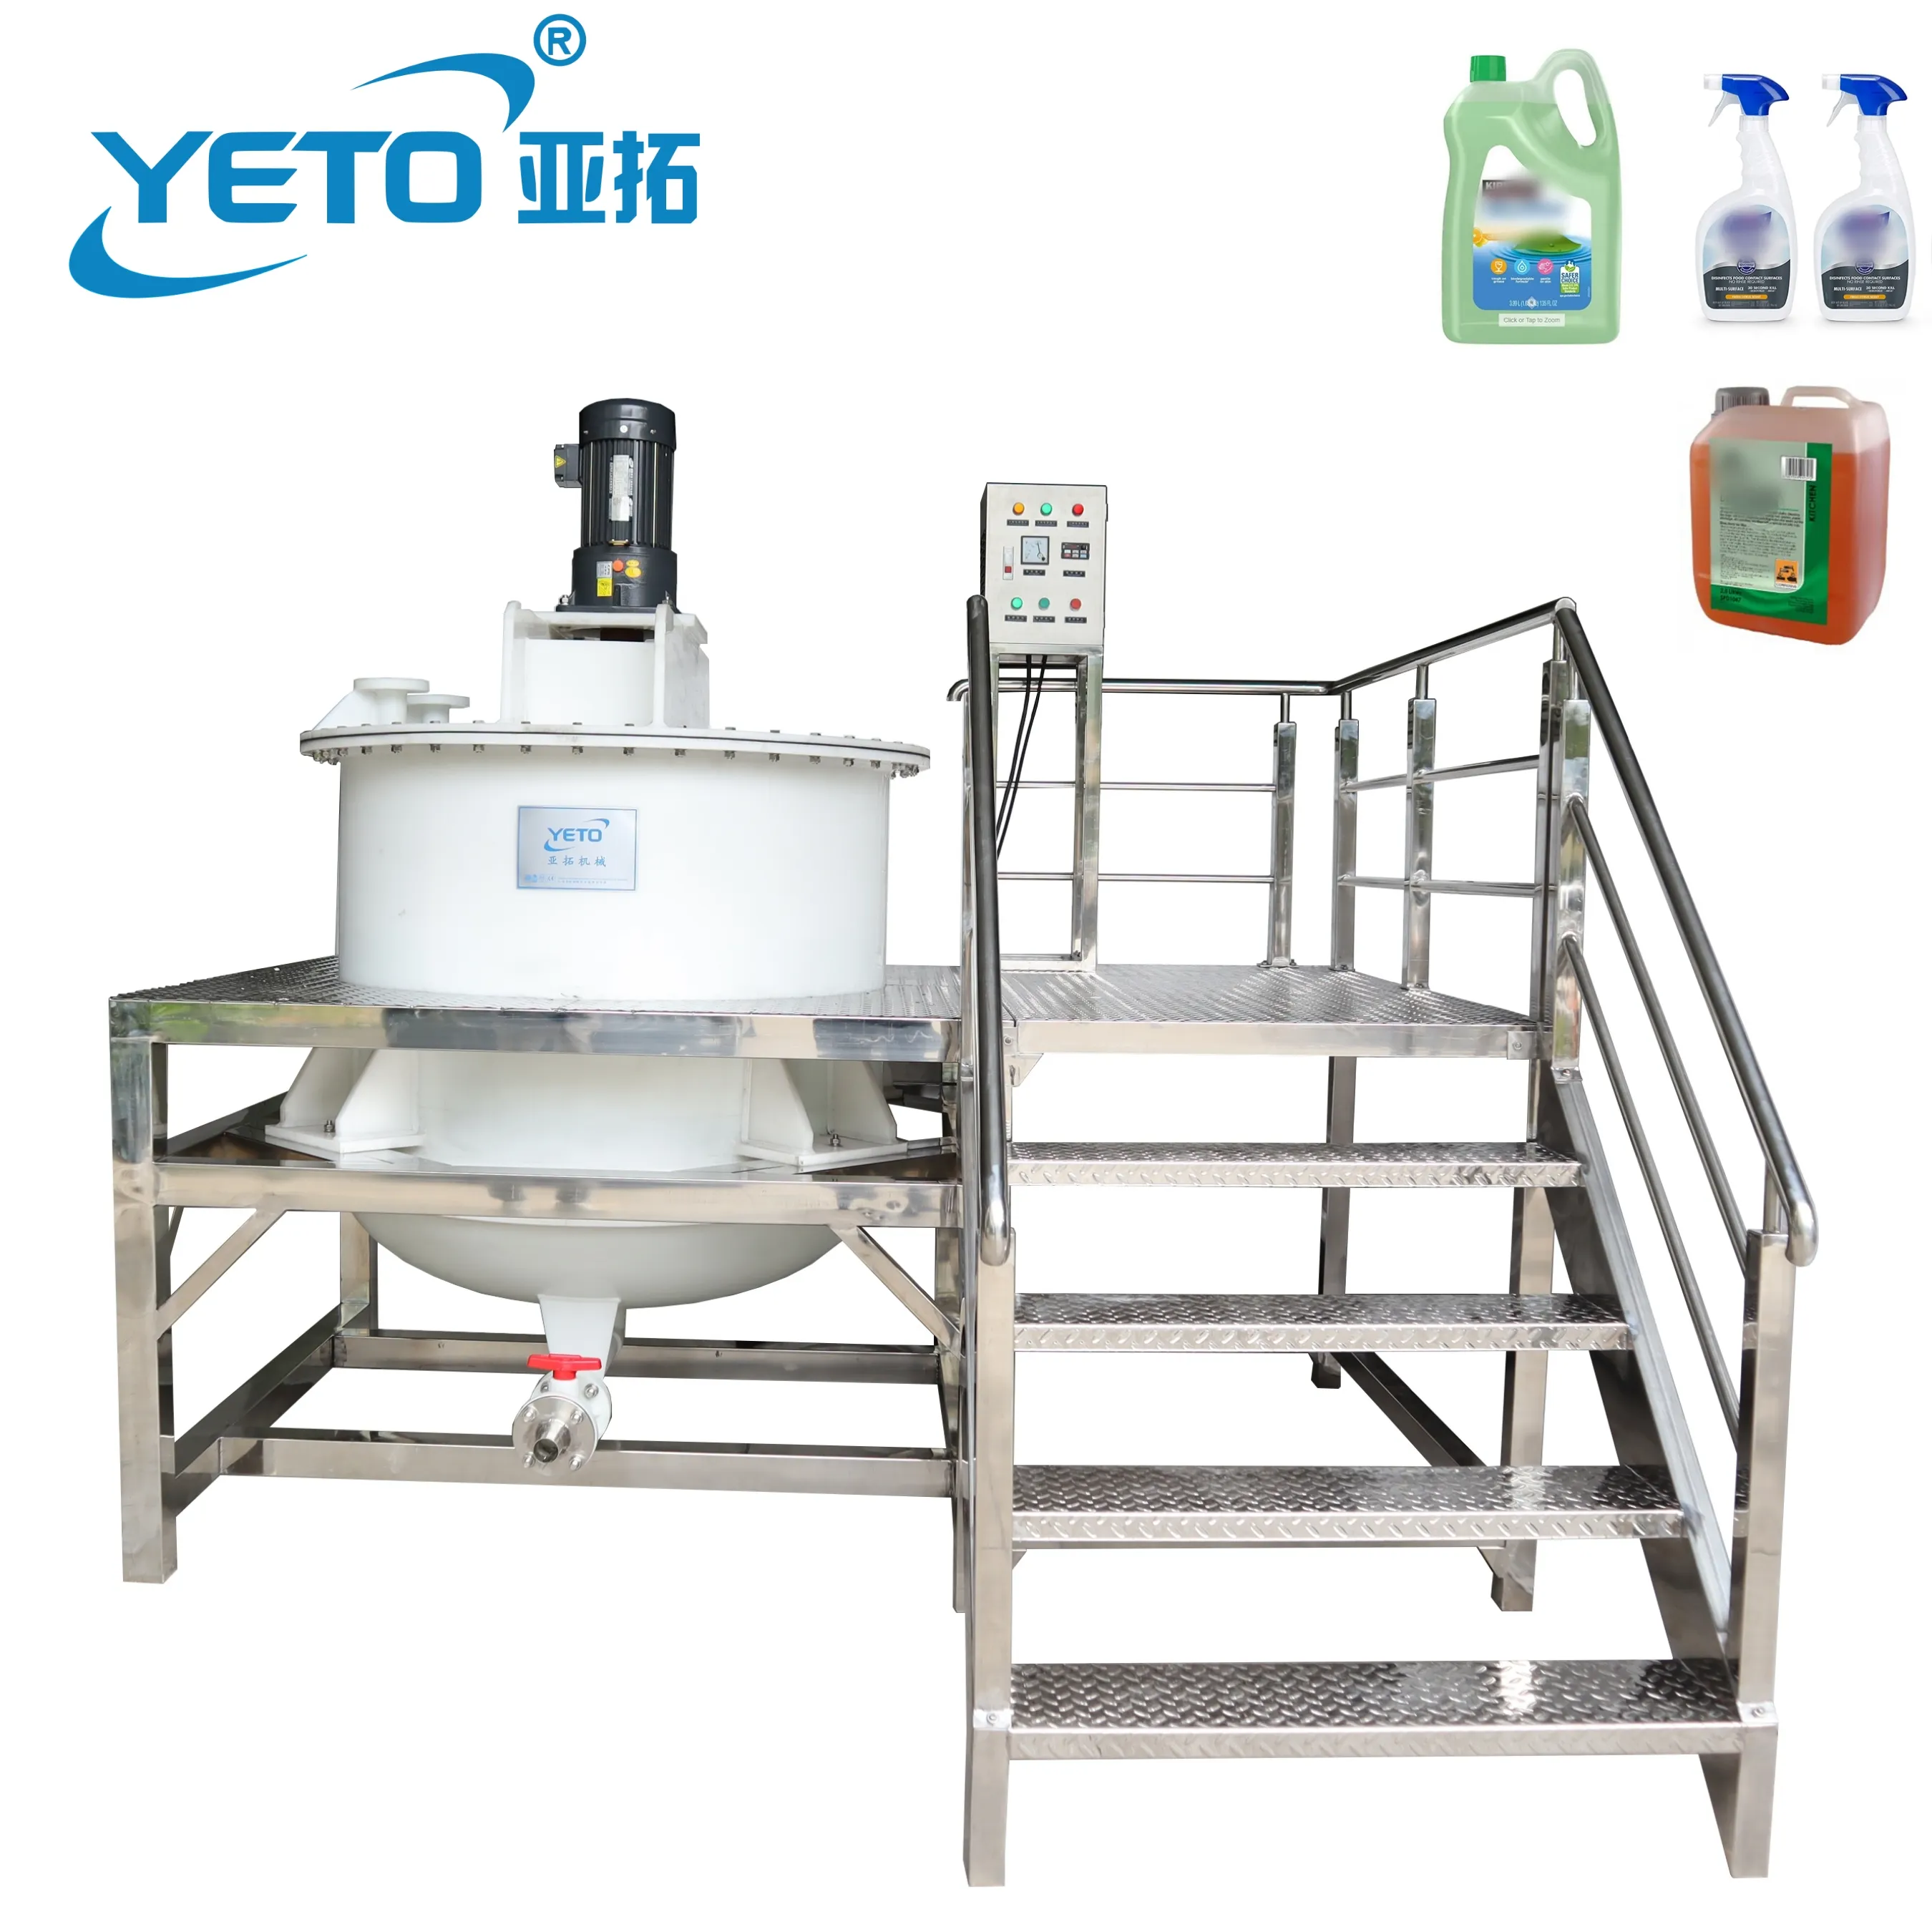 Yeto 1000L PP Anti-corrosion Mixing Tank Detergent Making Machine Toilet Cleaners bleacher Dish Soap Mixing machine